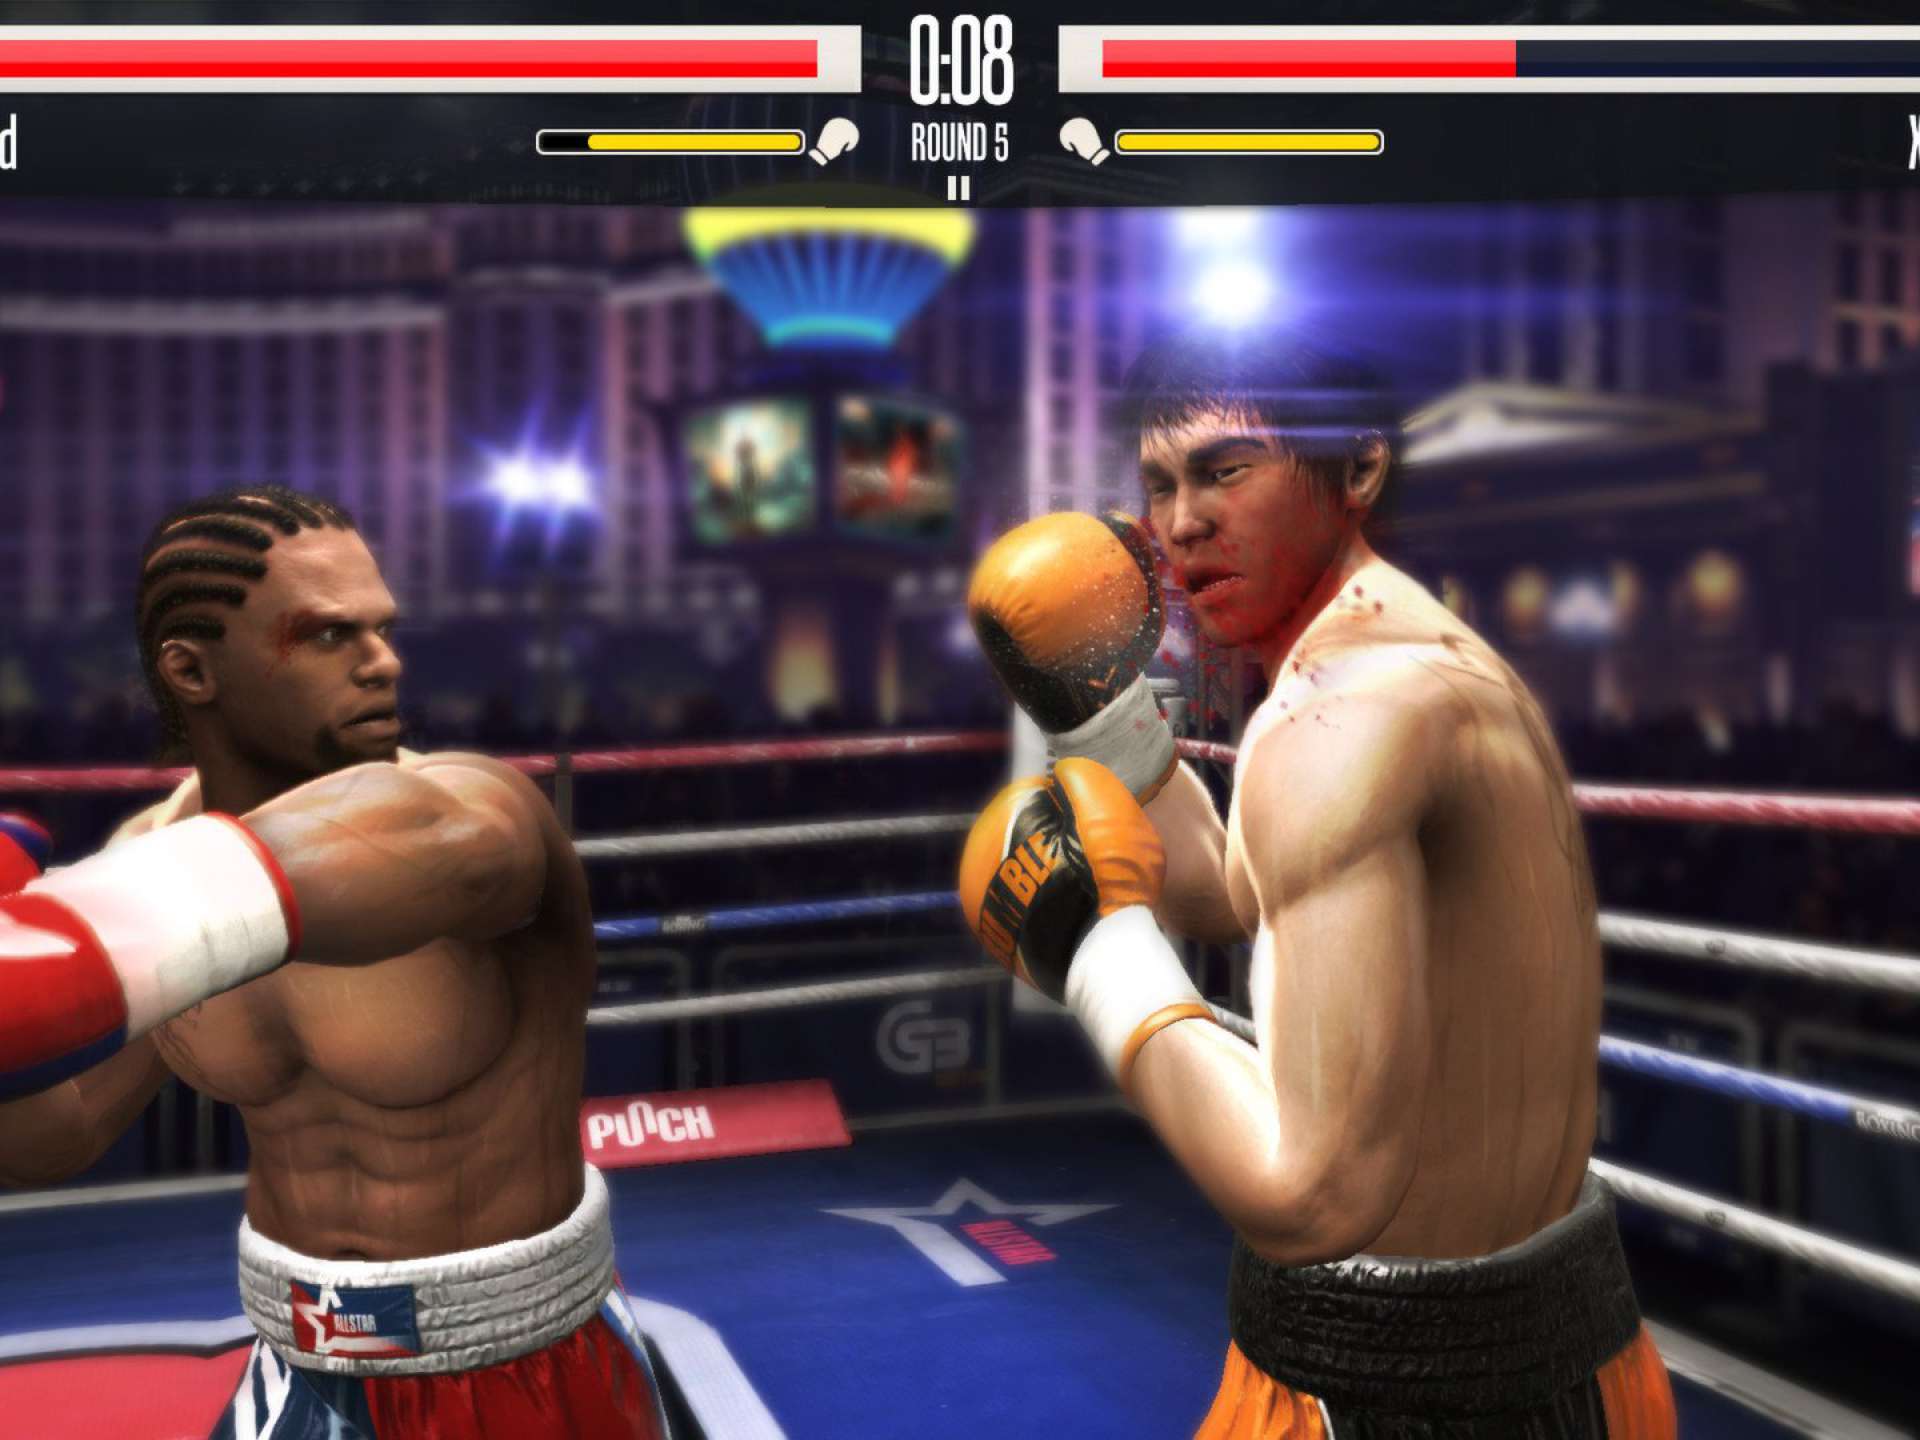 Untilited boxing game. Игра бокс real Boxing. Игра Реал боксинг игра игра игра игра. Игра Реал боксинг игра игра Реал боксинг. Игра бокс на PS 2.